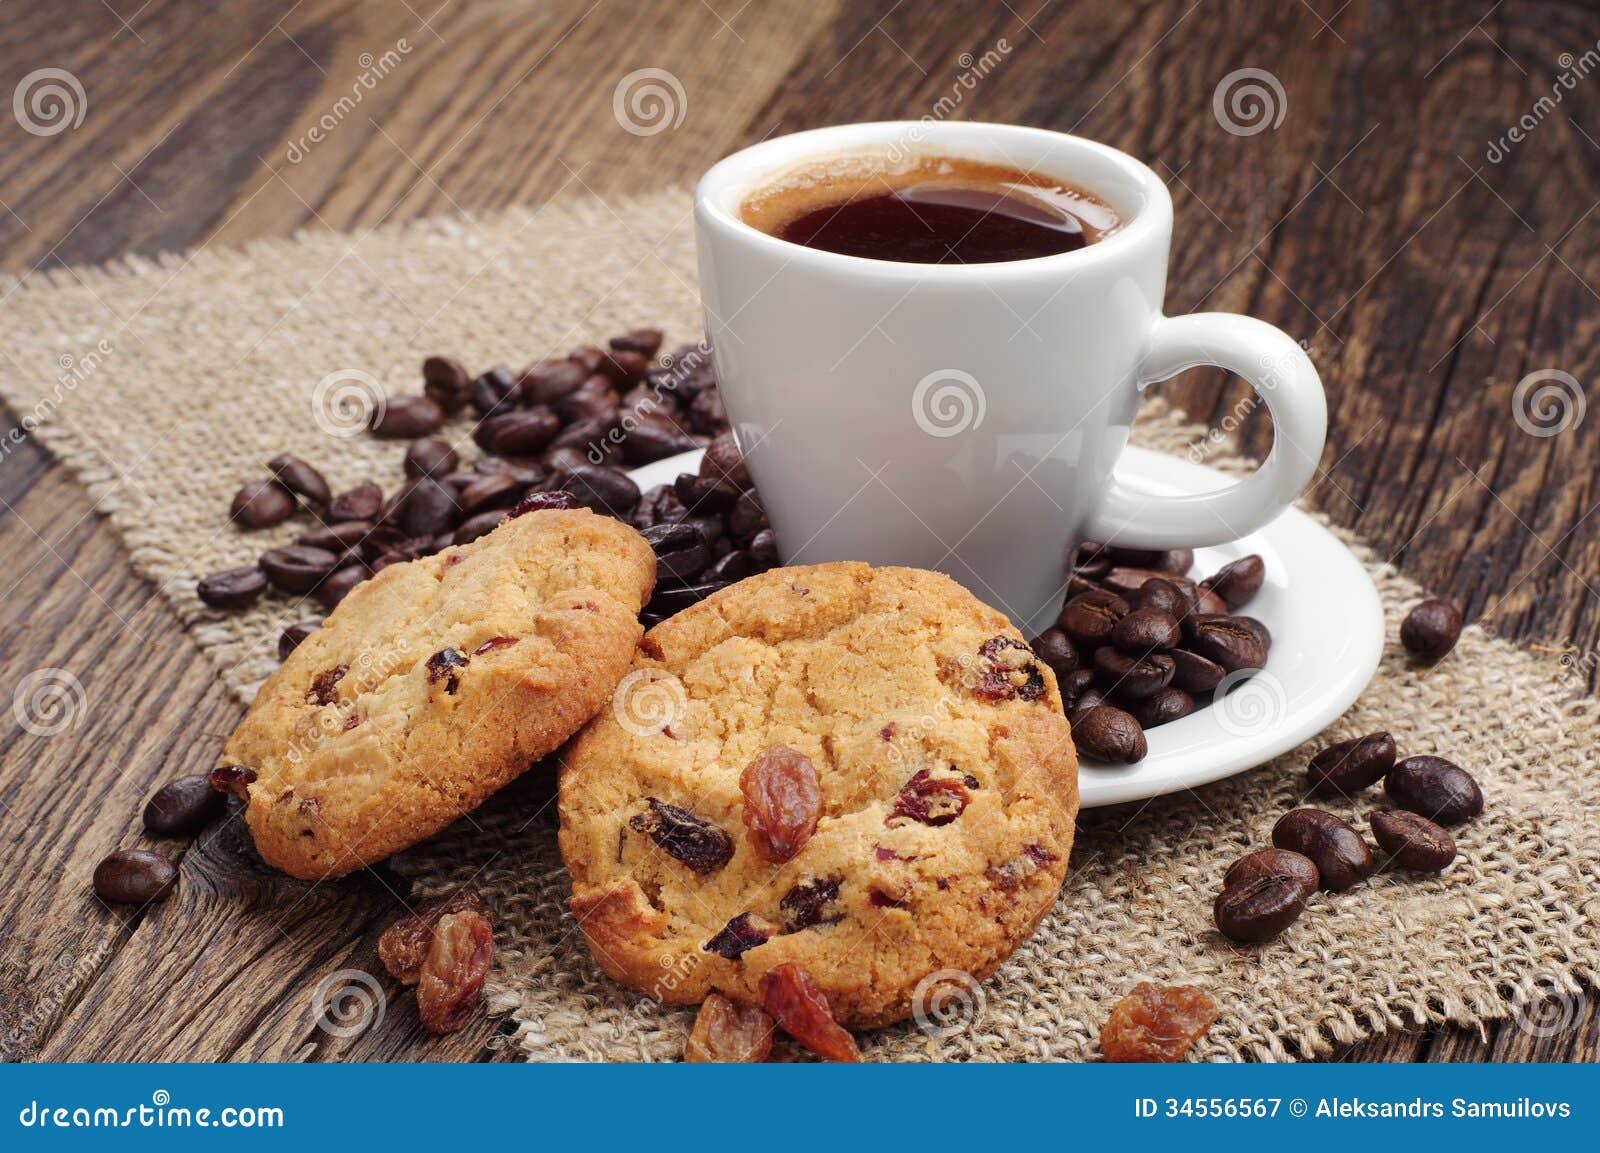 free clipart coffee and cookies - photo #31